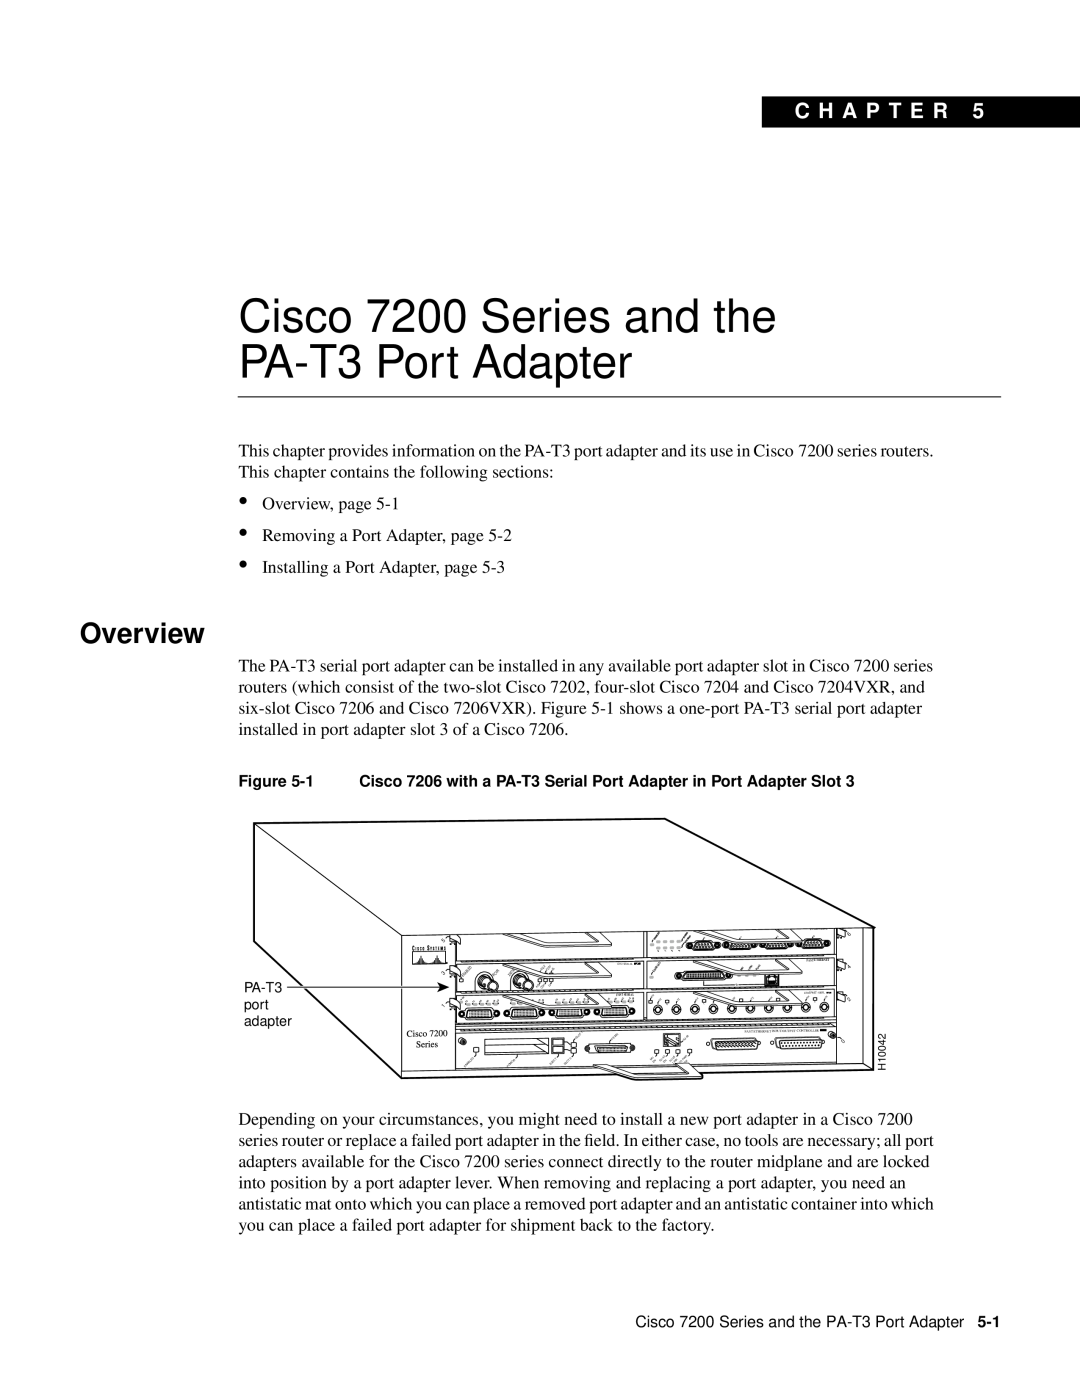 Cisco Systems manual Cisco 7200 Series and the PA-T3 Port Adapter, Overview, C H A P T E R 